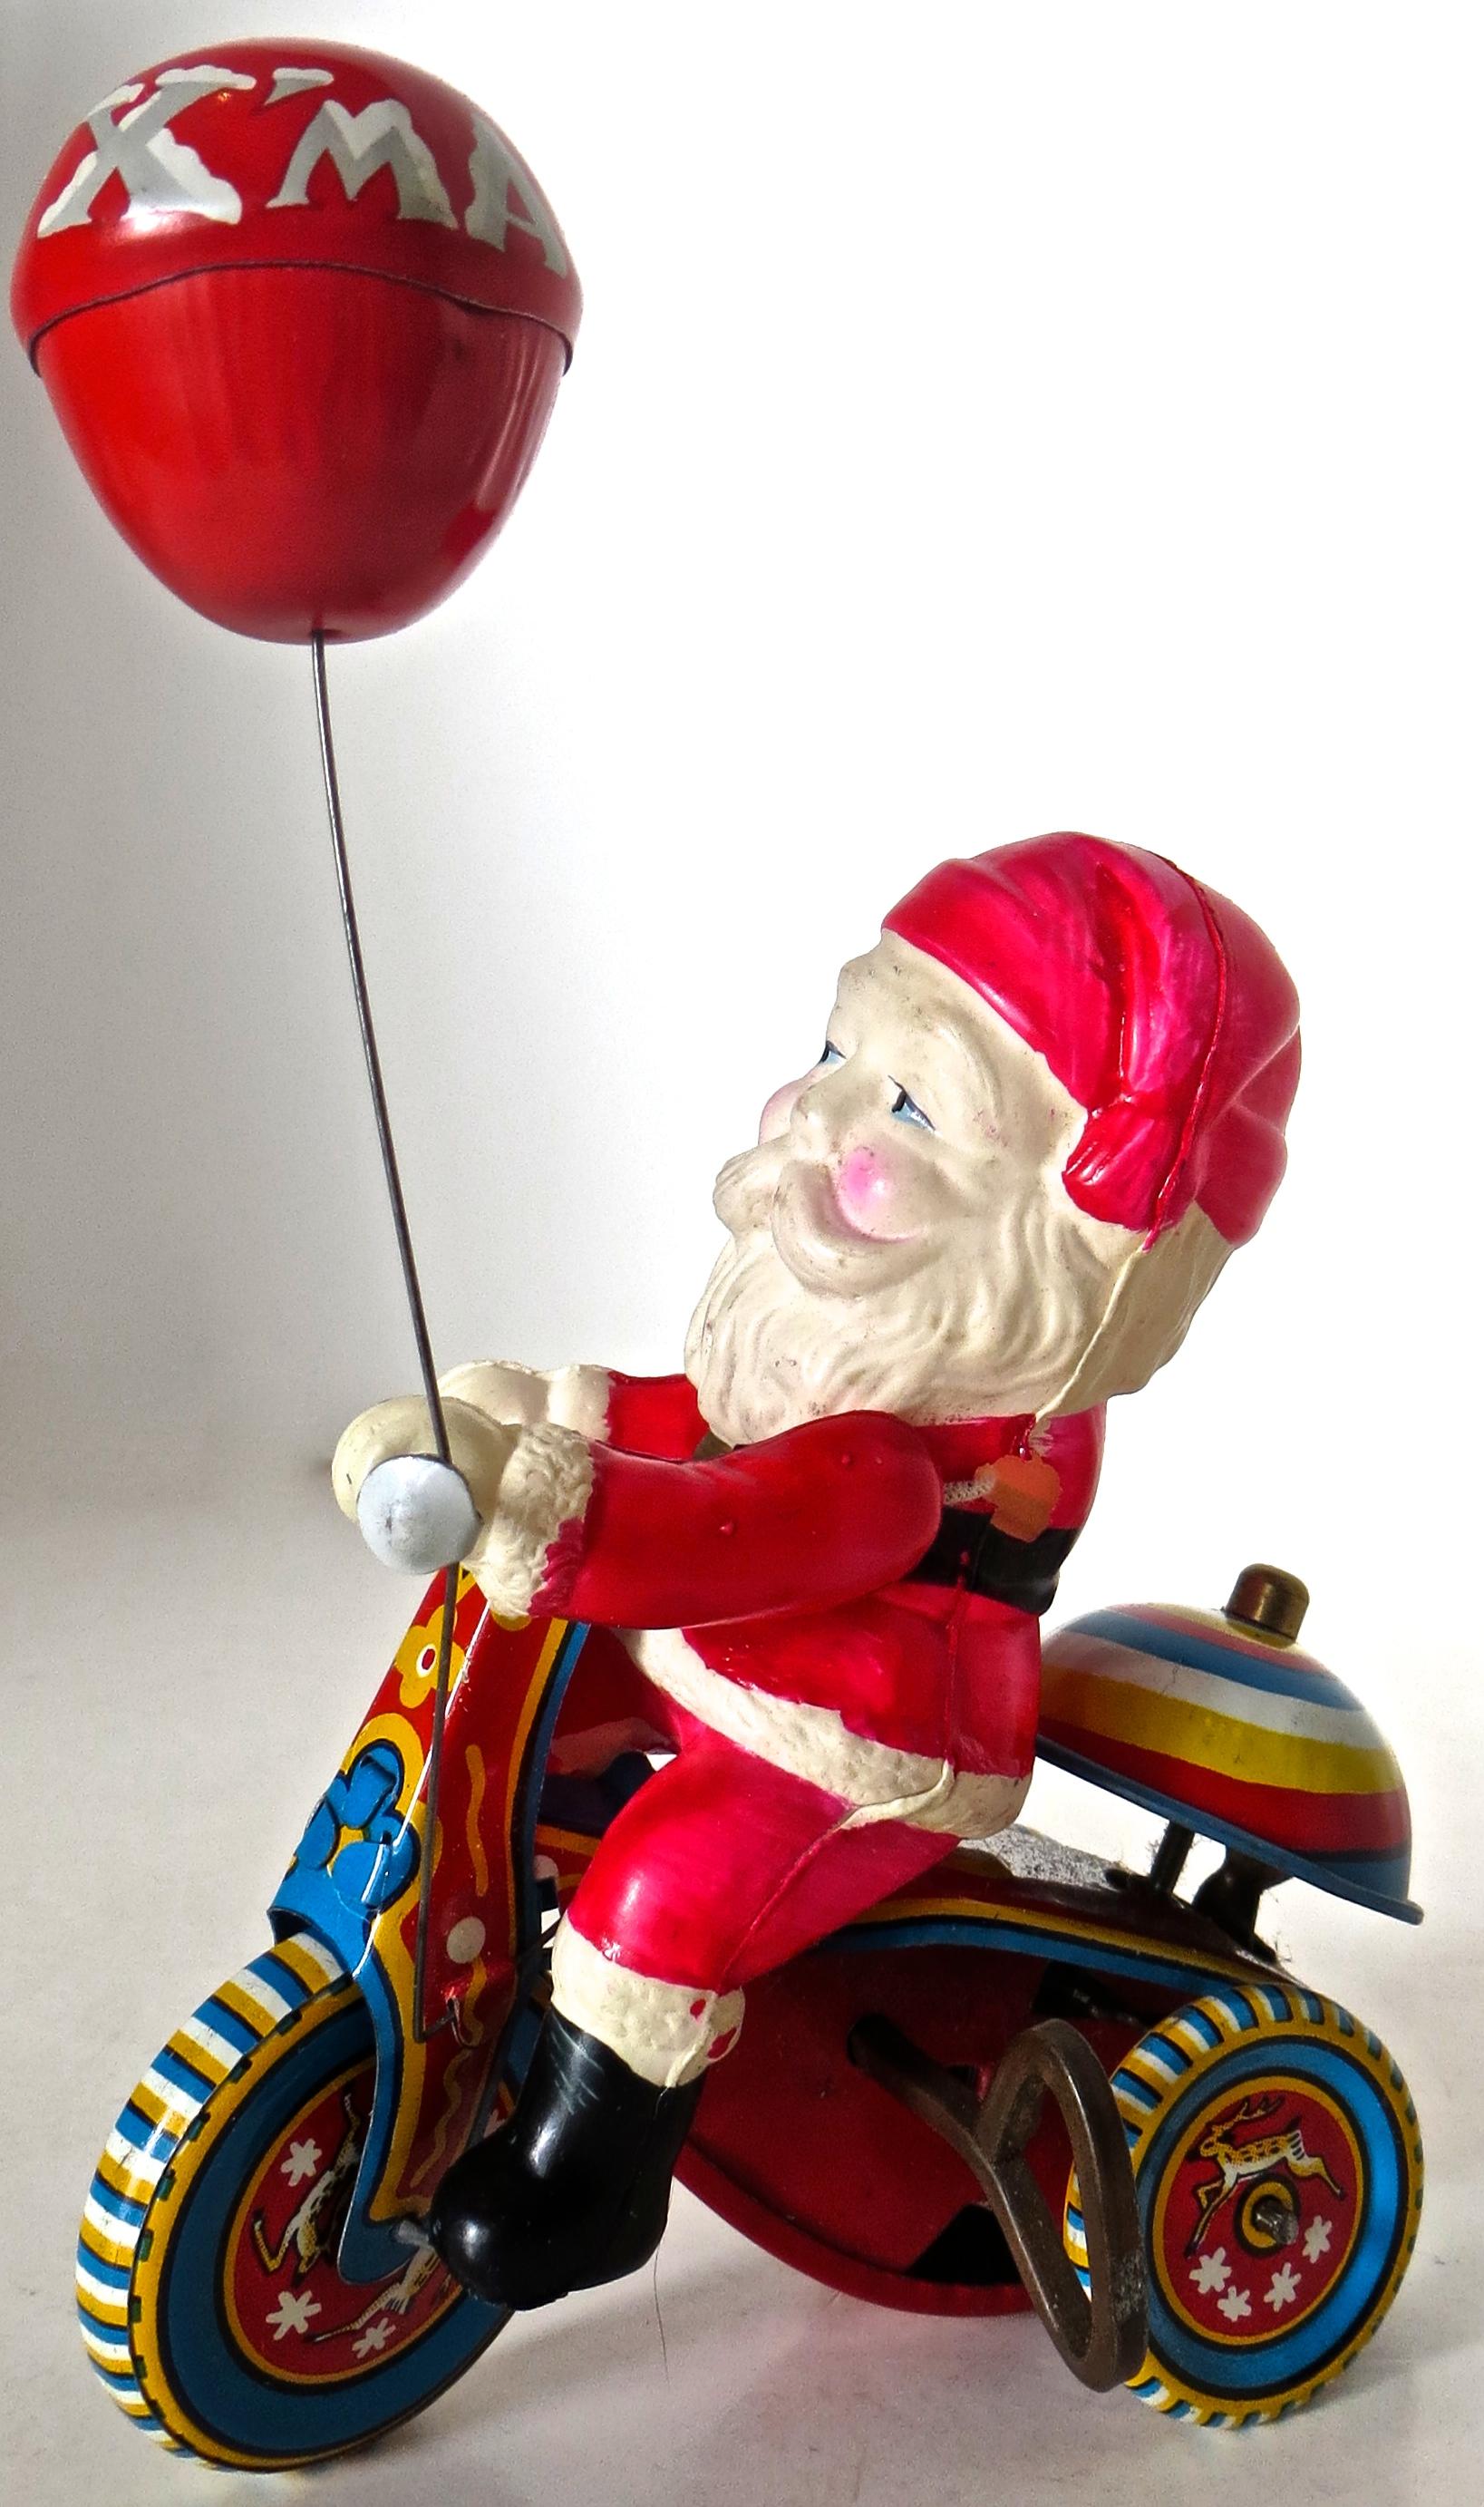 The celluloid Santa and tin tricycle indicate a mid-1950s manufacture for this charming Japanese wind up toy which comes with the original box in which it was shipped. Unlike most examples found of this toy, this example is near mint and operates